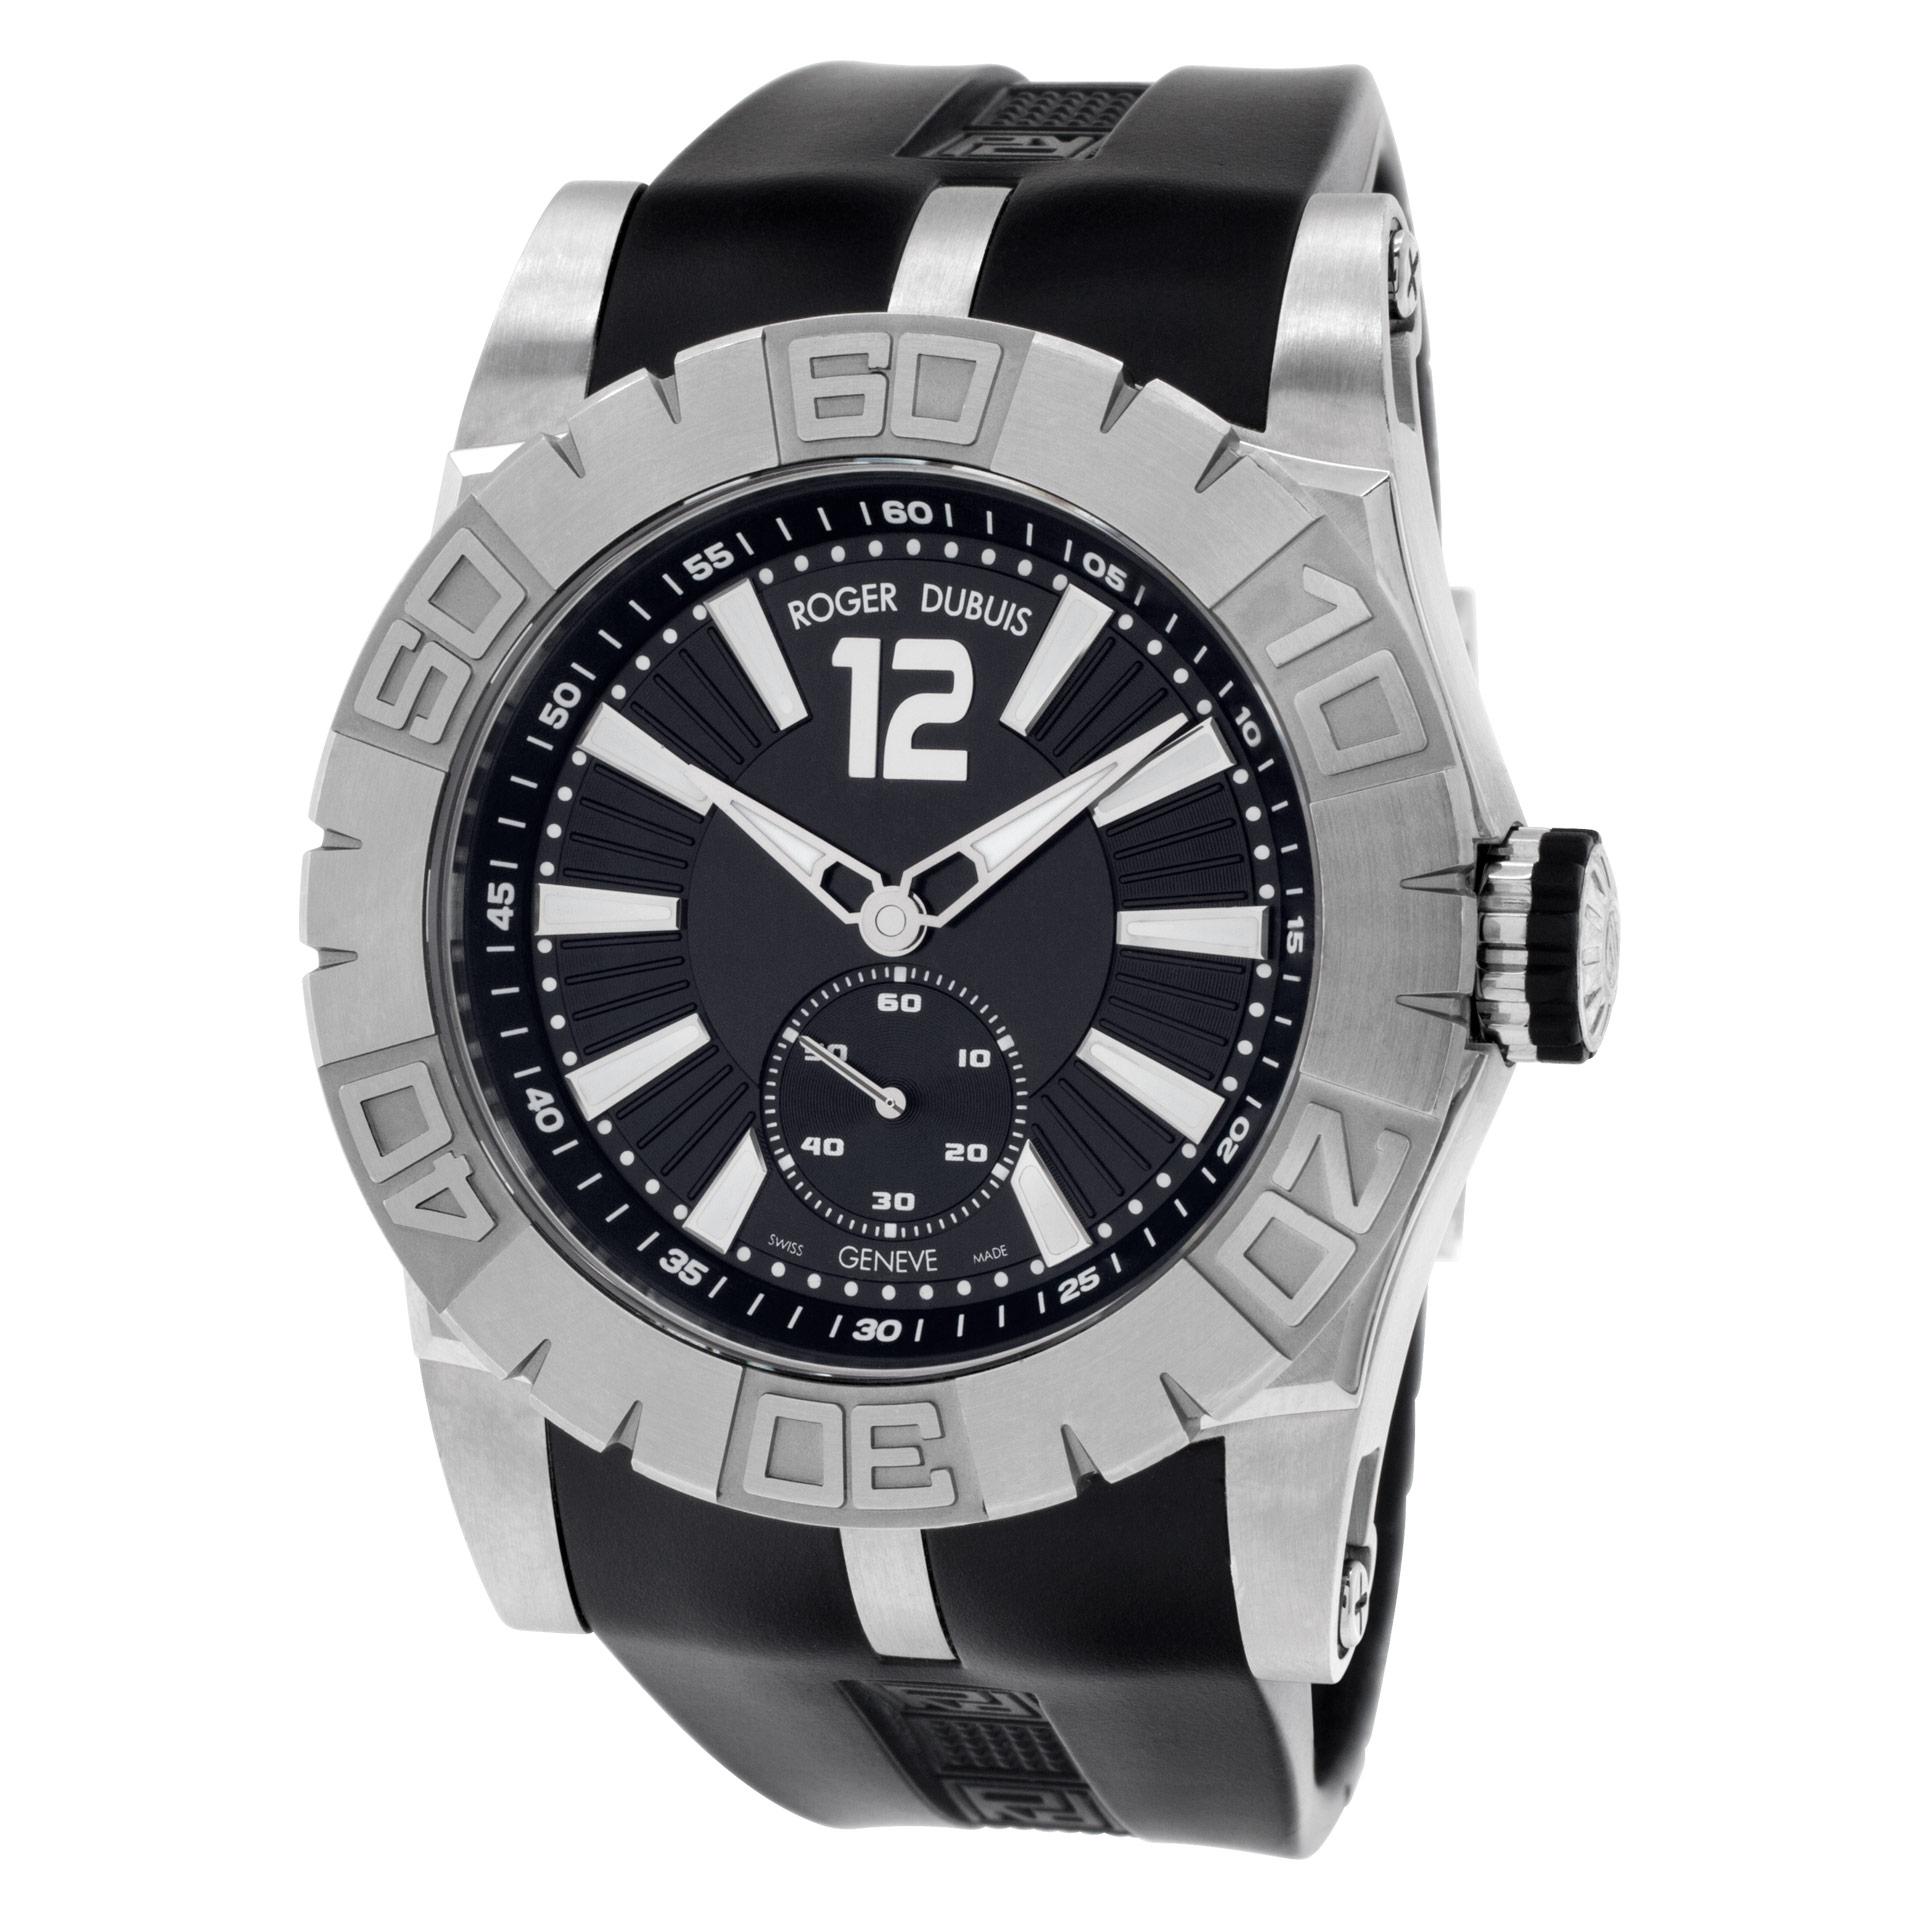 Roger Dubuis Easy Diver in stainless steel on black rubber band. Automatic movement under glass w/ subseconds. 46mm case size. Ref RDDBSE0257. Circa 2010s. Fine Pre-owned Roger Dubuis Watch.  Certified preowned Sport Roger Dubuis Easy Diver